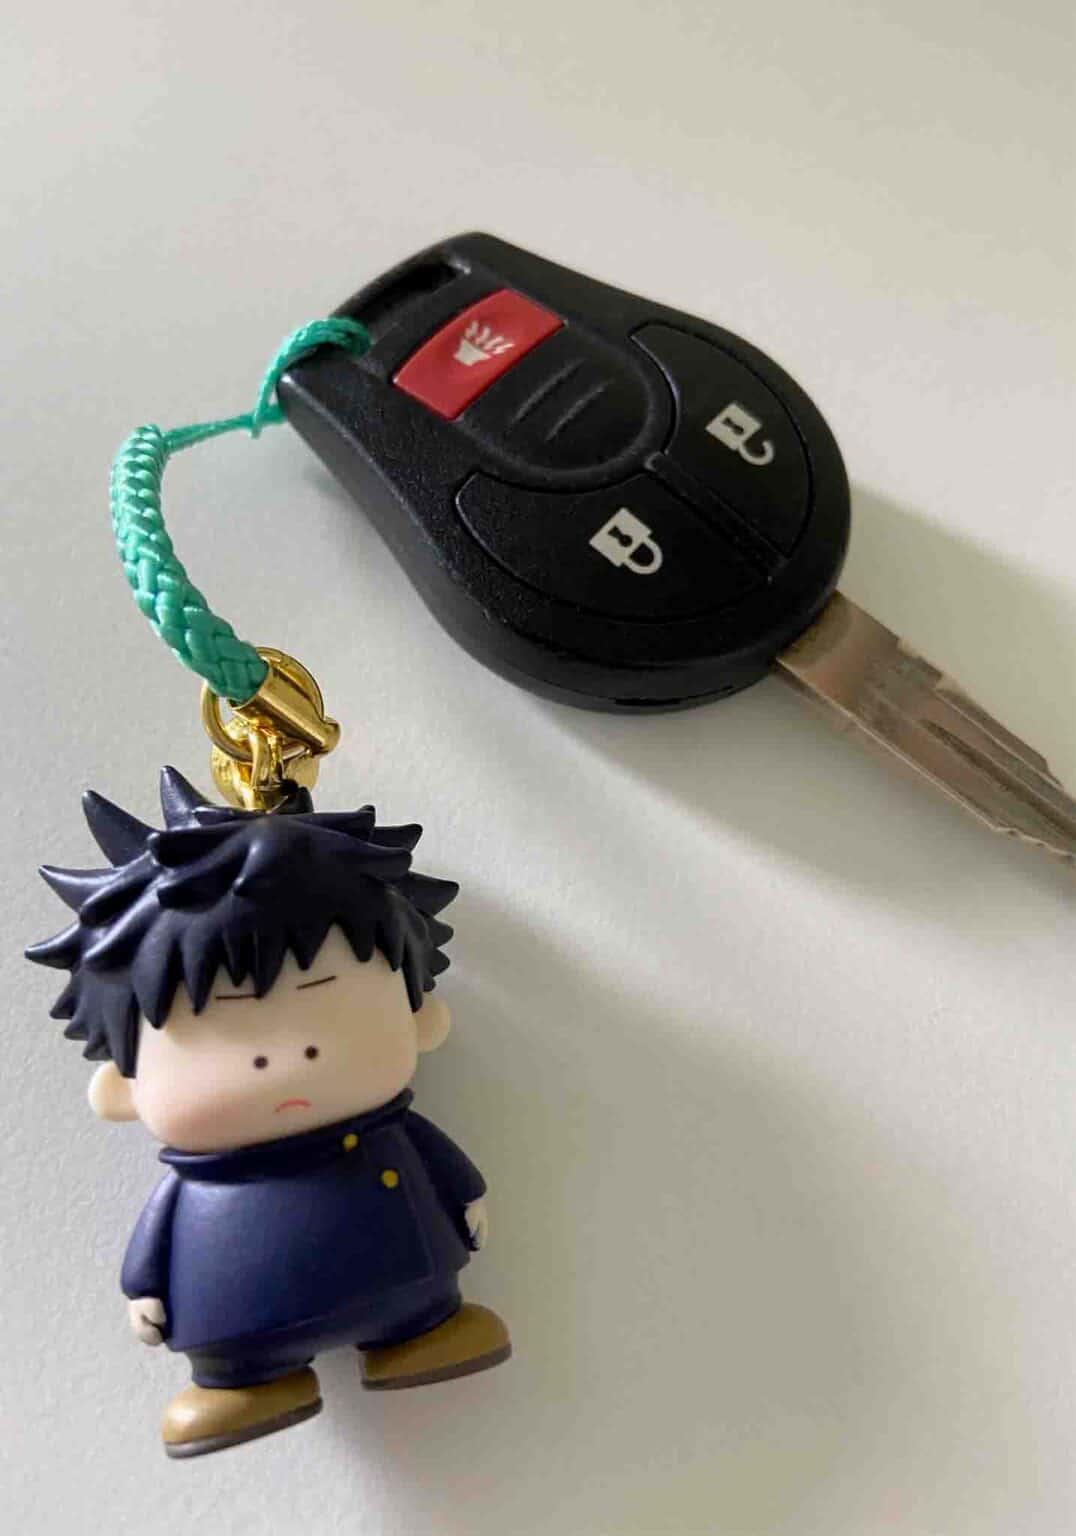 Clever Idiots Jujutsu Kaisen Movie 0 Vinyl Figure Charm with Bell Surprise Box Kawaii Gifts 4580045305774